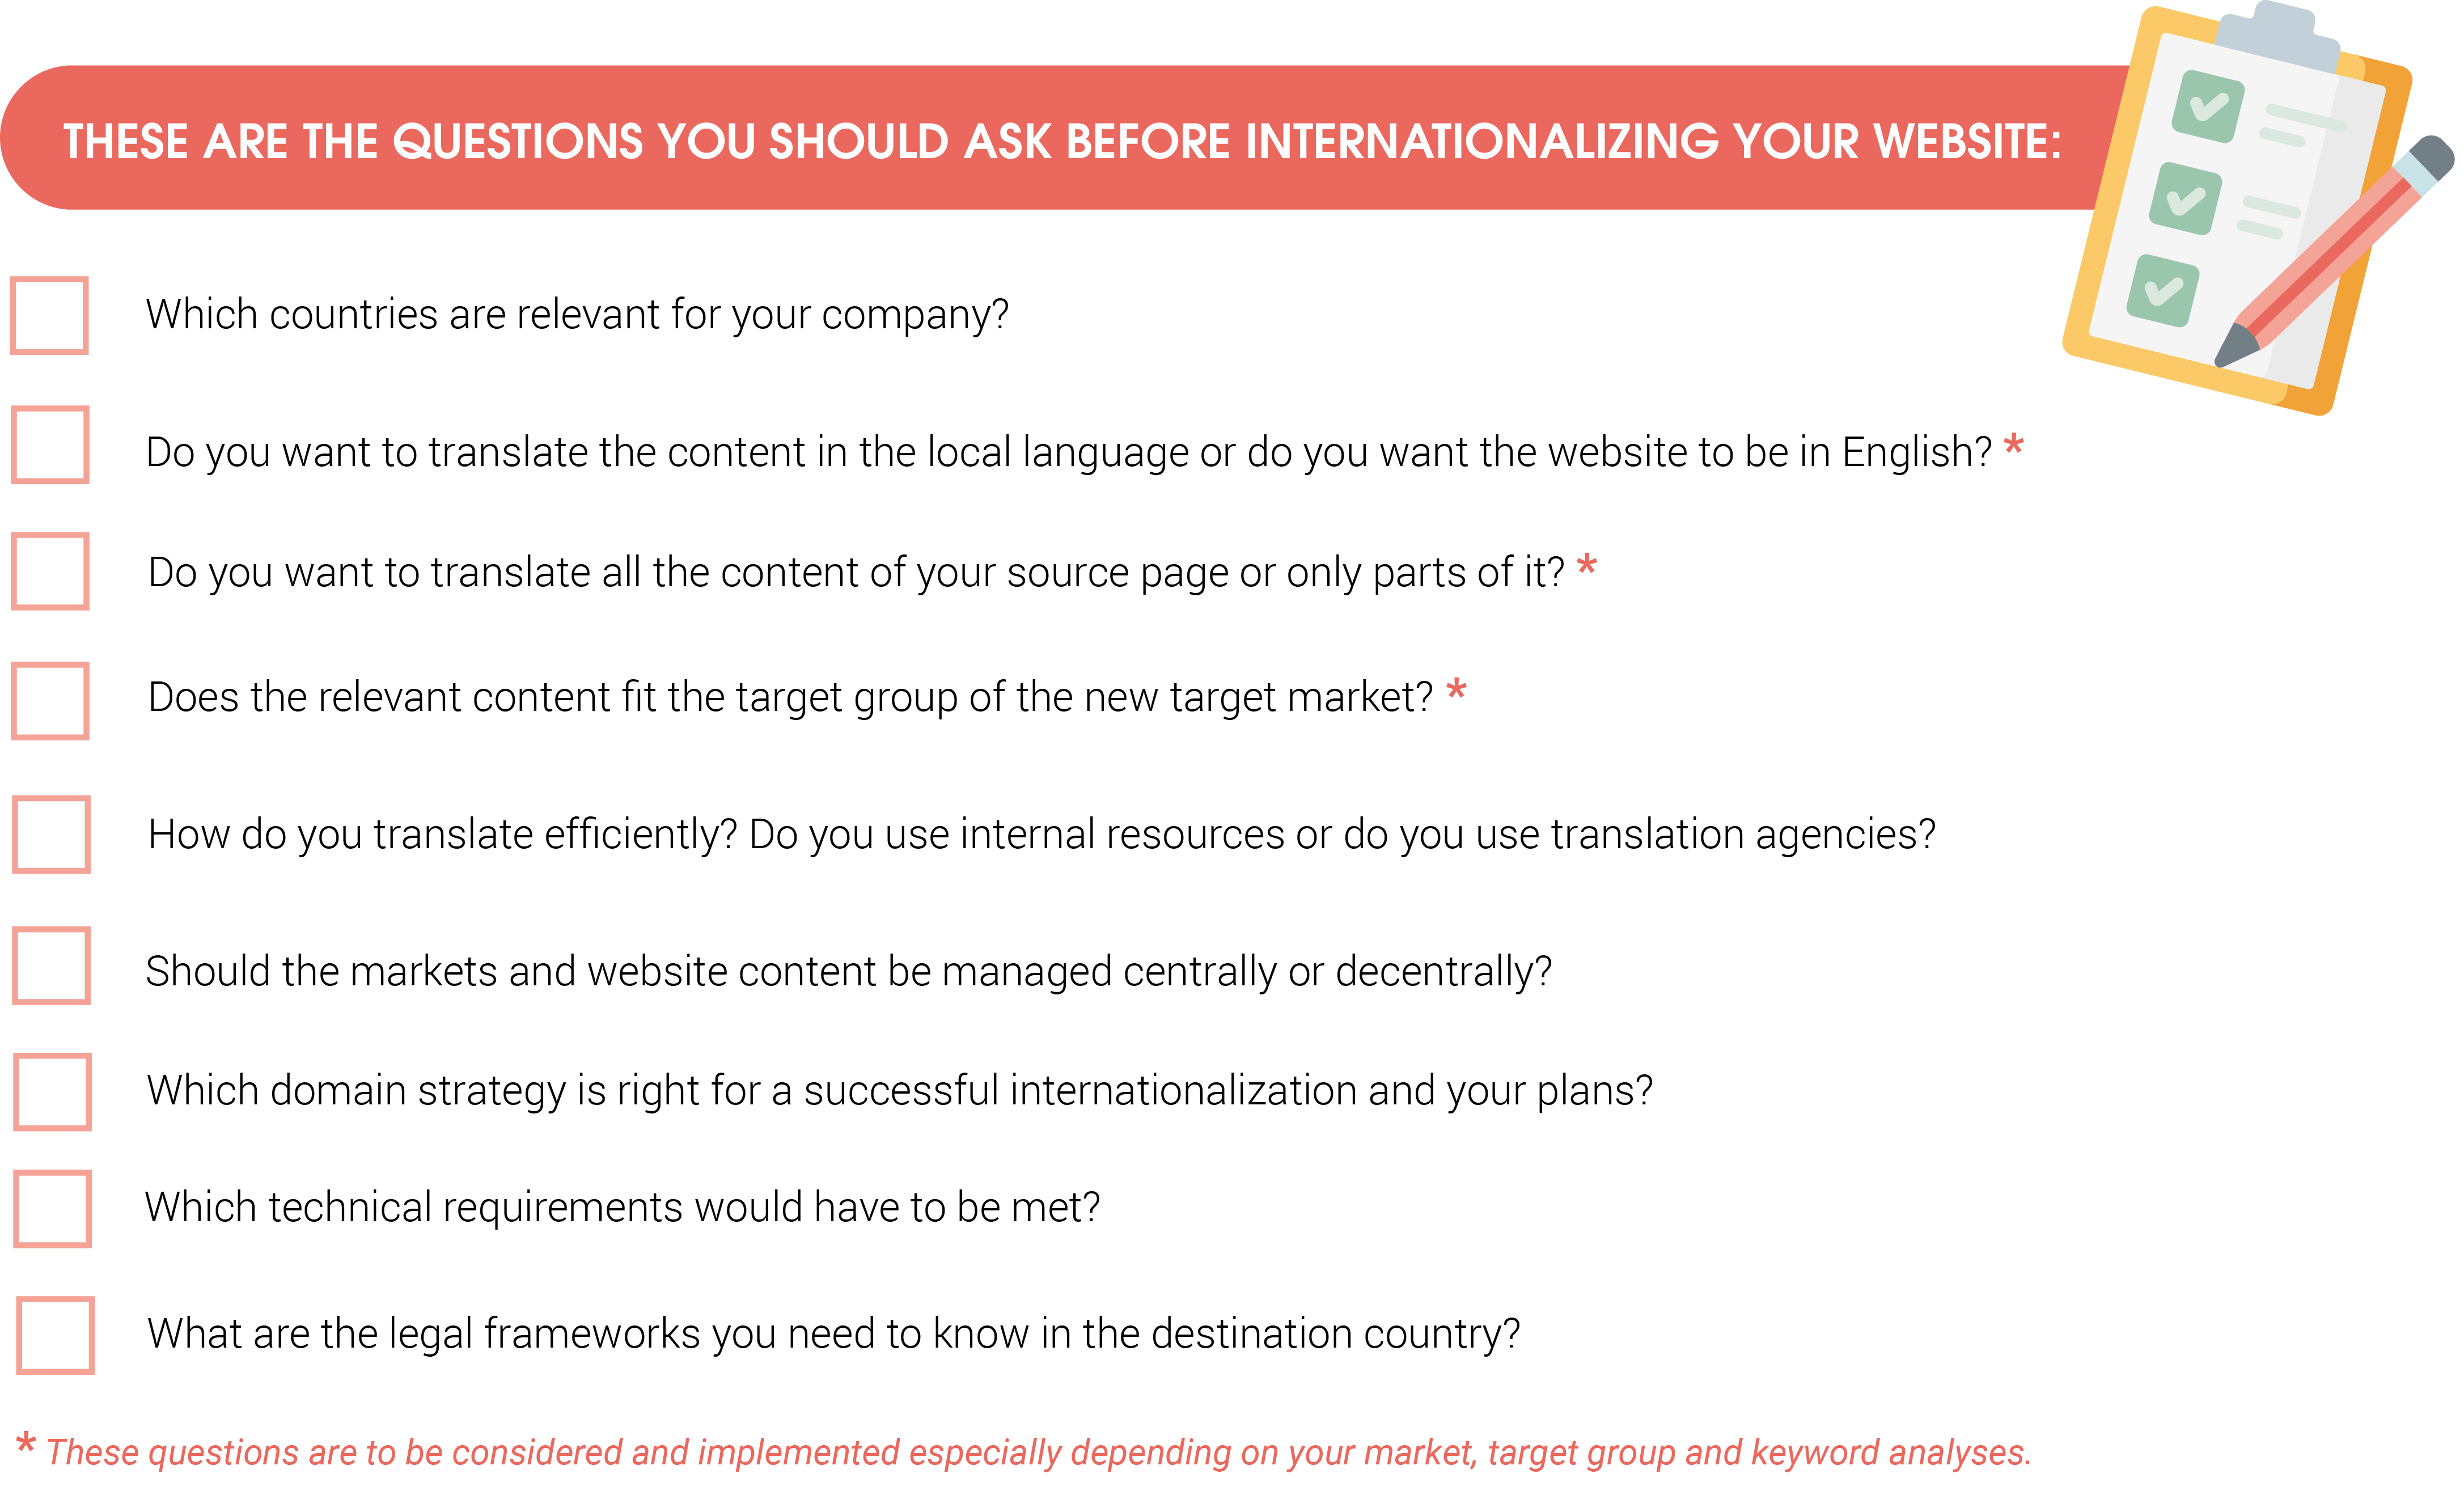 The picture shows a checklist with different questions you should clarify before internationalizing your website. 